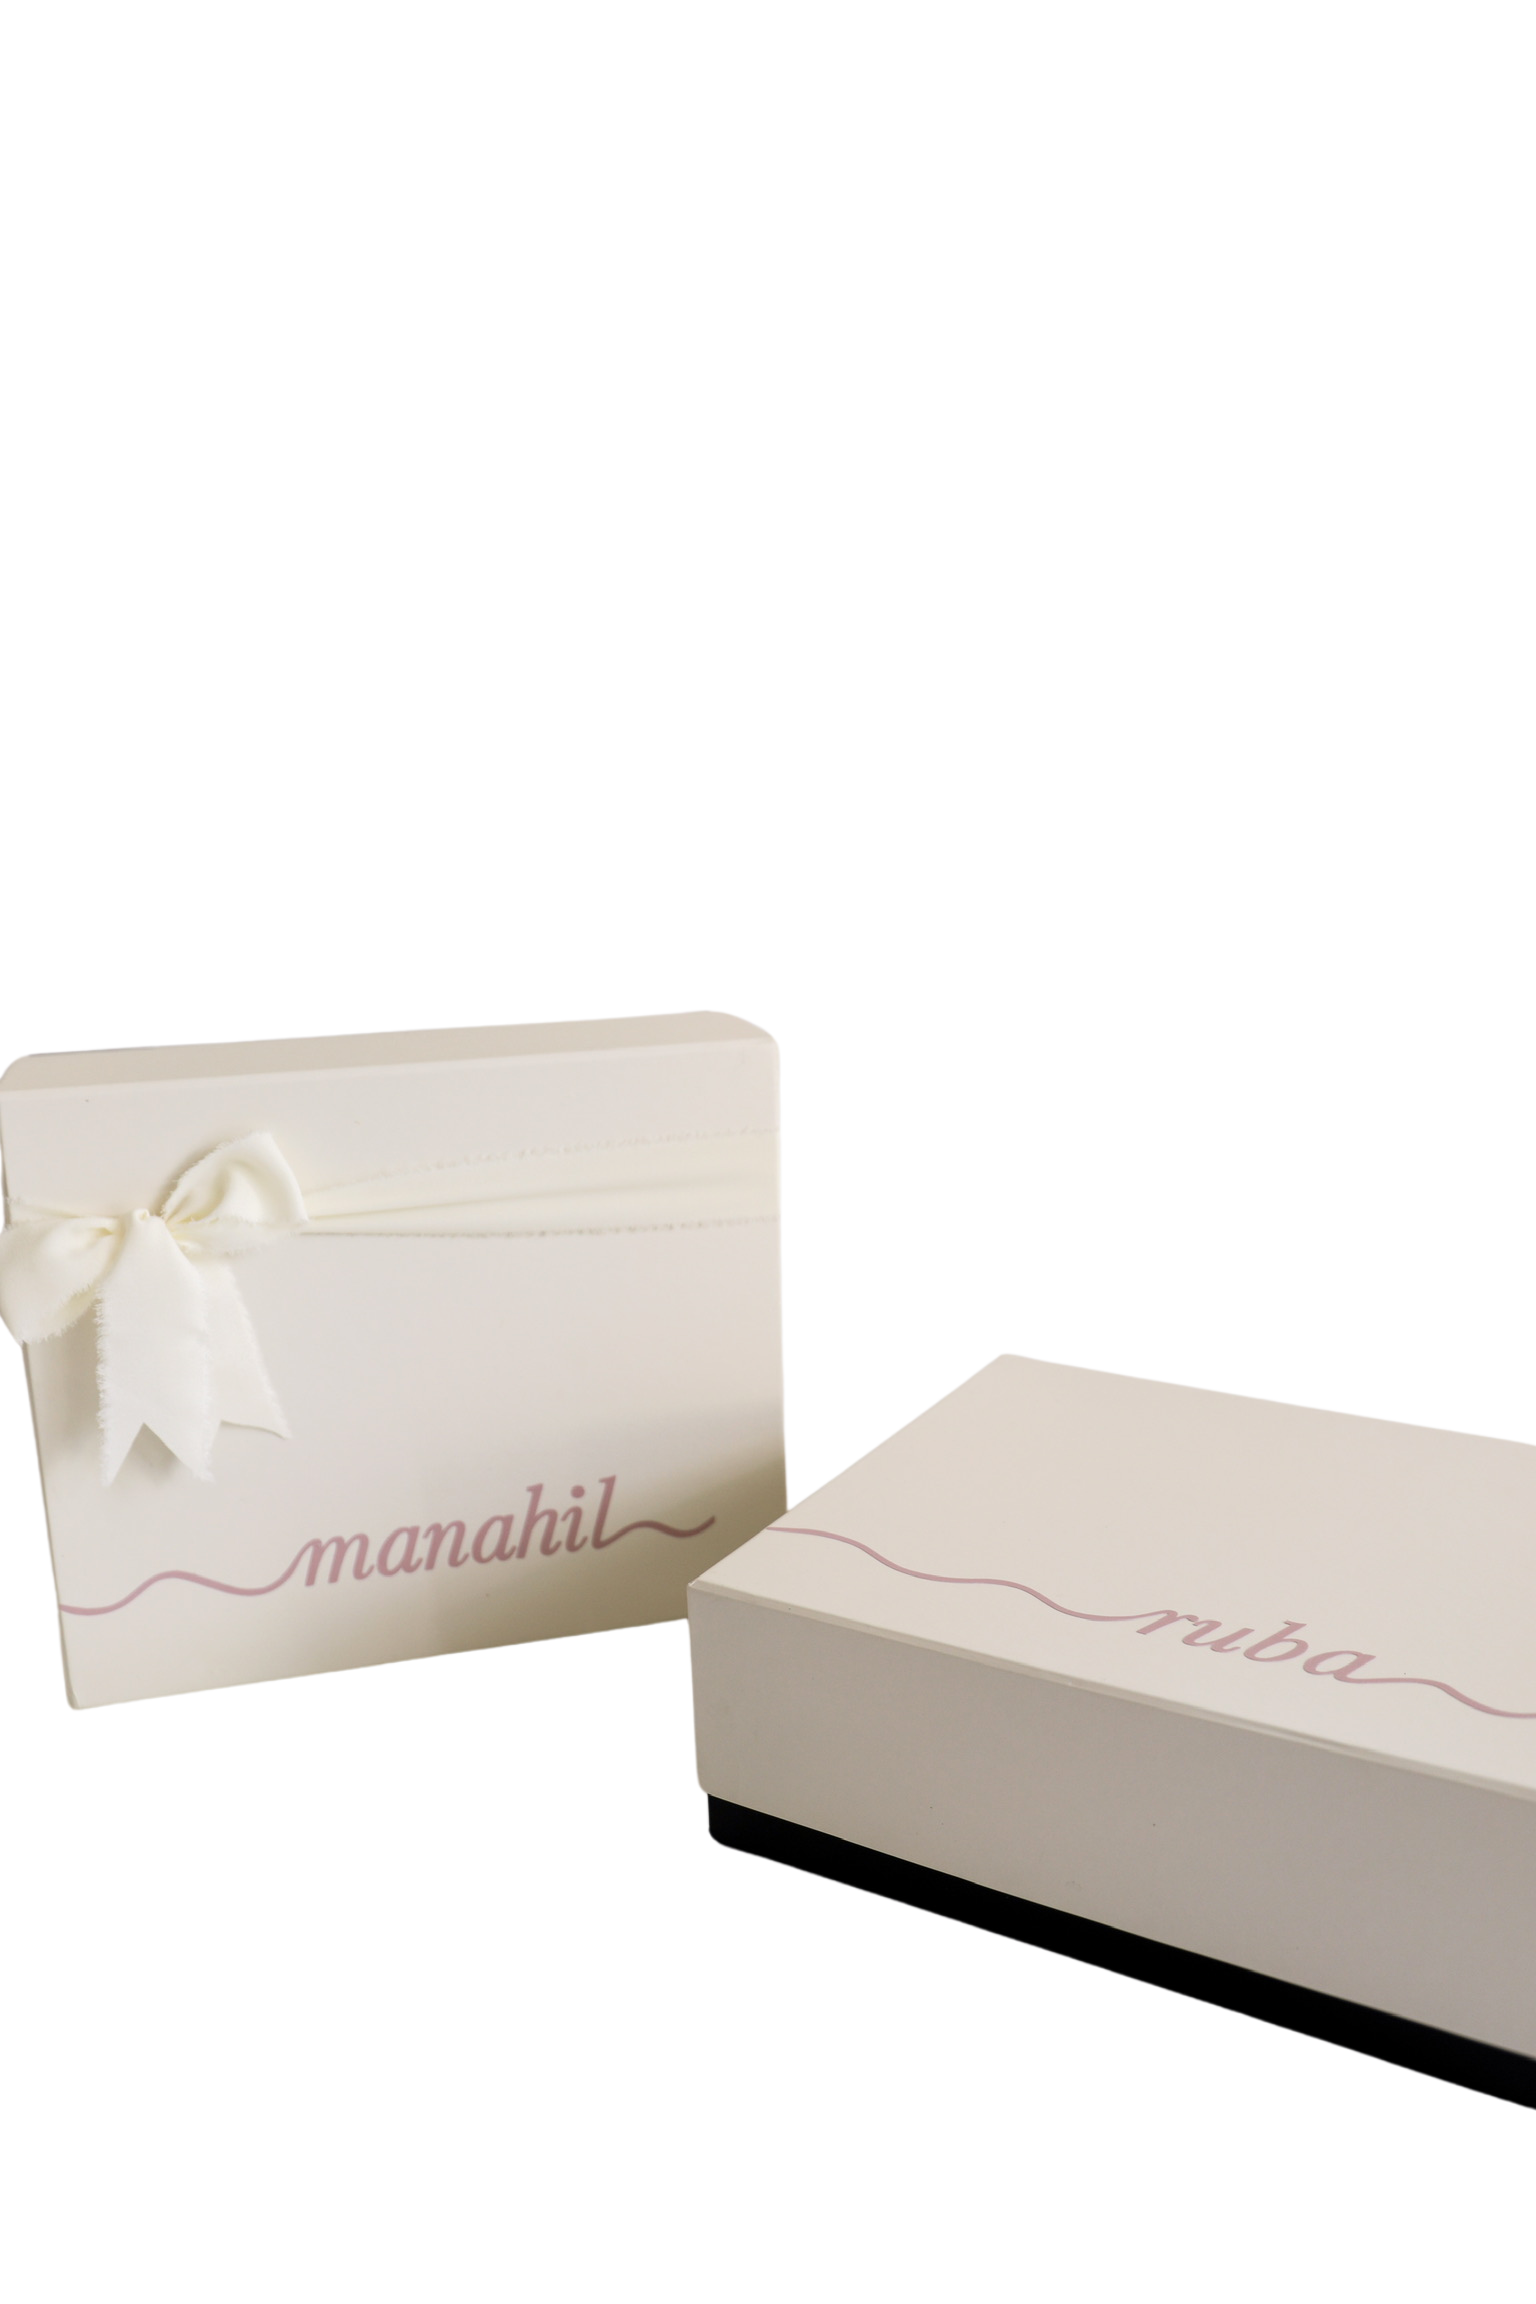 Give the gift of personalization with our custom name gift box. With a custom name on the box, this gift is as unique and thoughtful as the recipient.   Add the custom name in our comments section during checkout. 